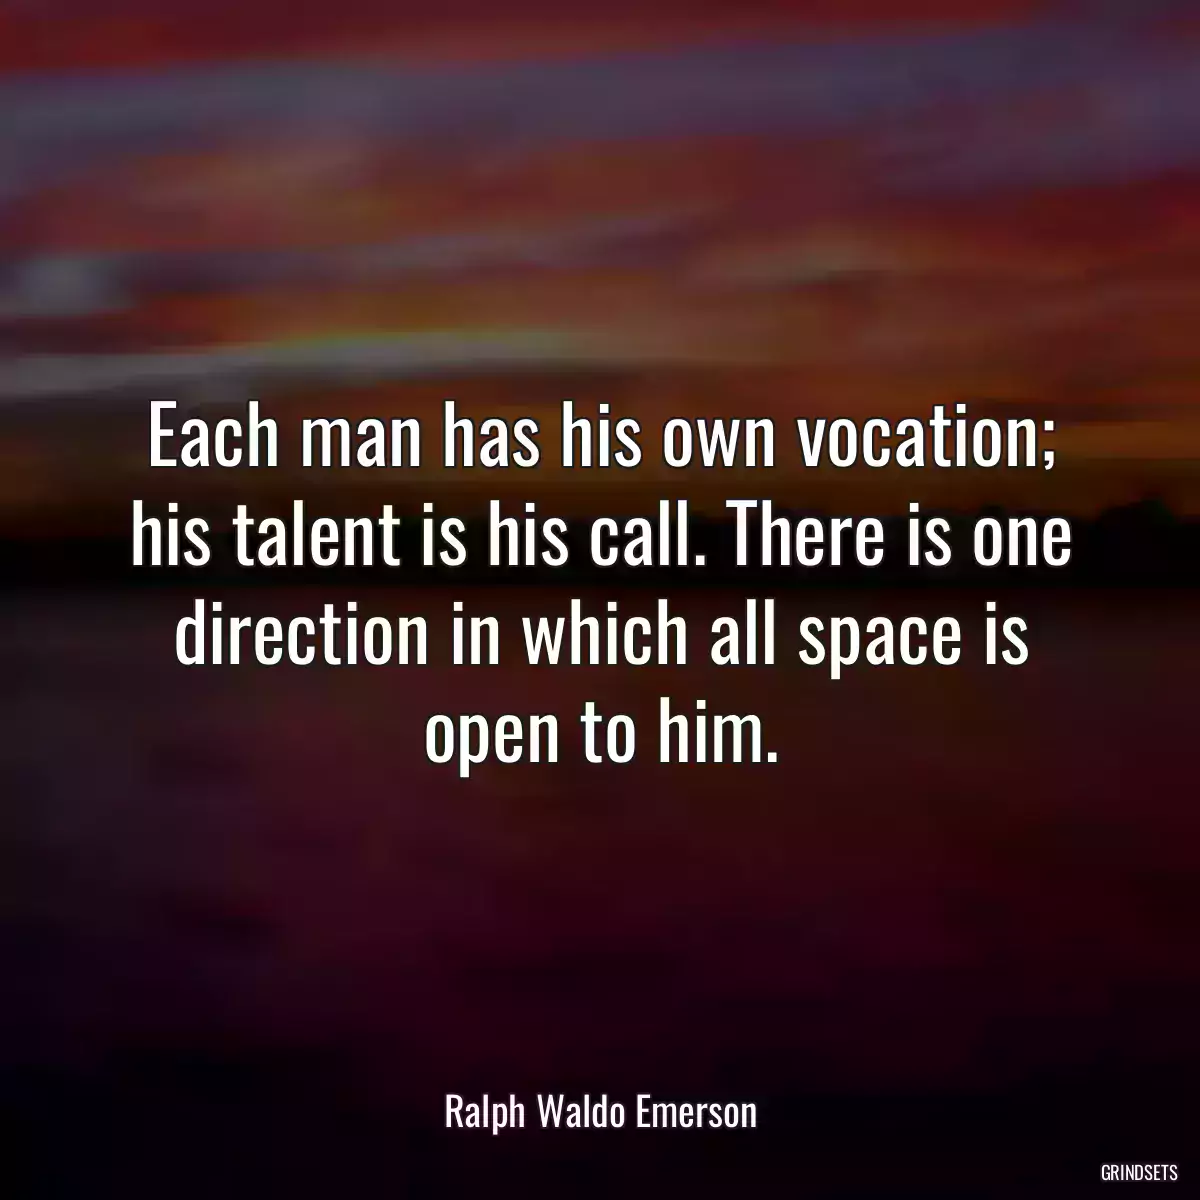 Each man has his own vocation; his talent is his call. There is one direction in which all space is open to him.